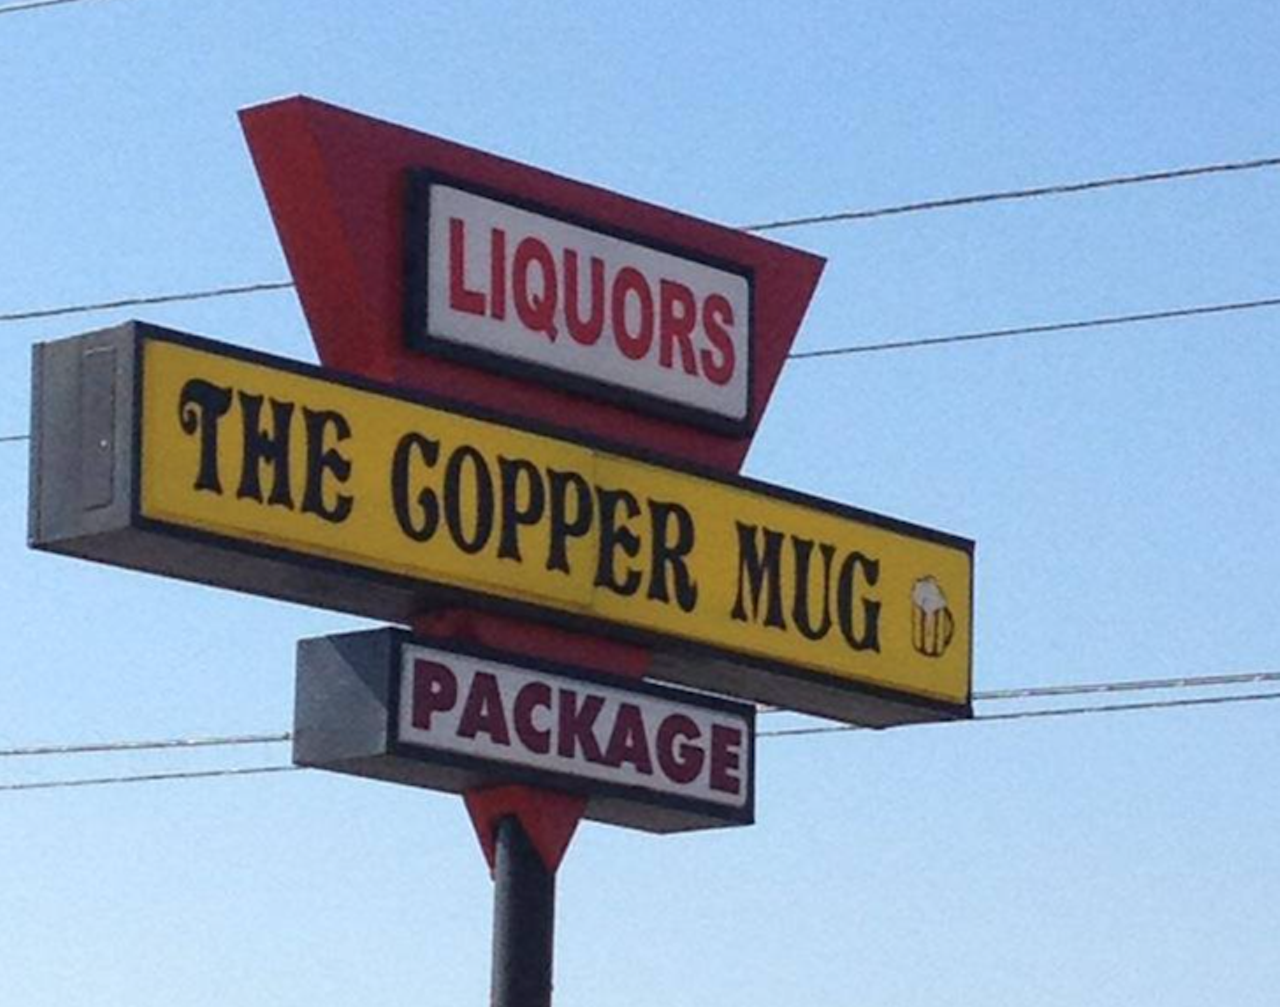 Copper Mug
1463 S Belcher Rd., Clearwater
The Copper Mug is a classic TB watering hole. Dart and golf games are available, and the store sells lottery tickets. Drink cheaply, and kick back and relax.
Photo via Copper Mug/Facebook